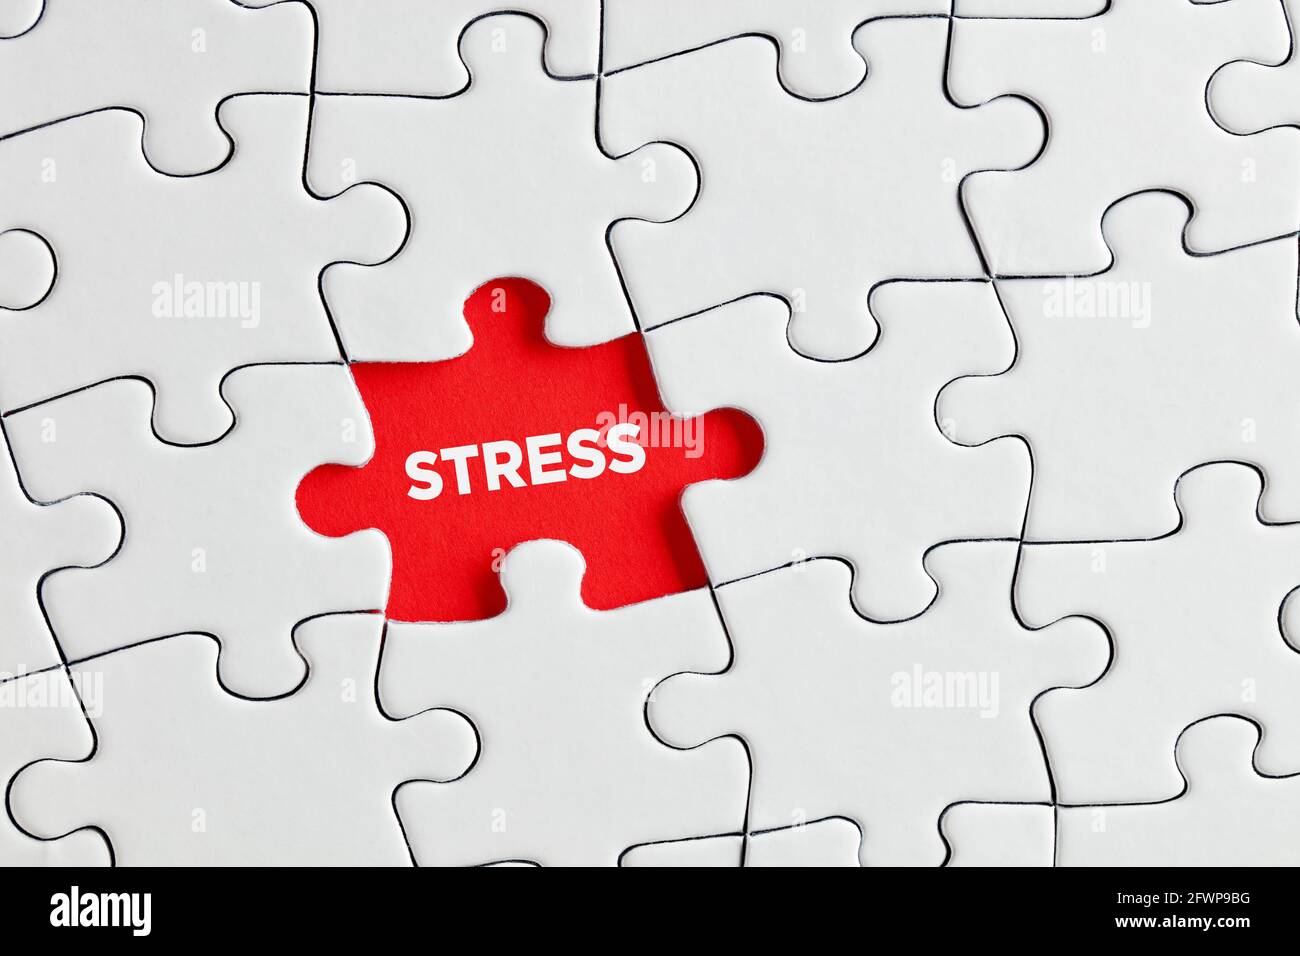 The word stress written on red missing puzzle piece. Exposing or discovering underlying stress or tension concept. Stock Photo